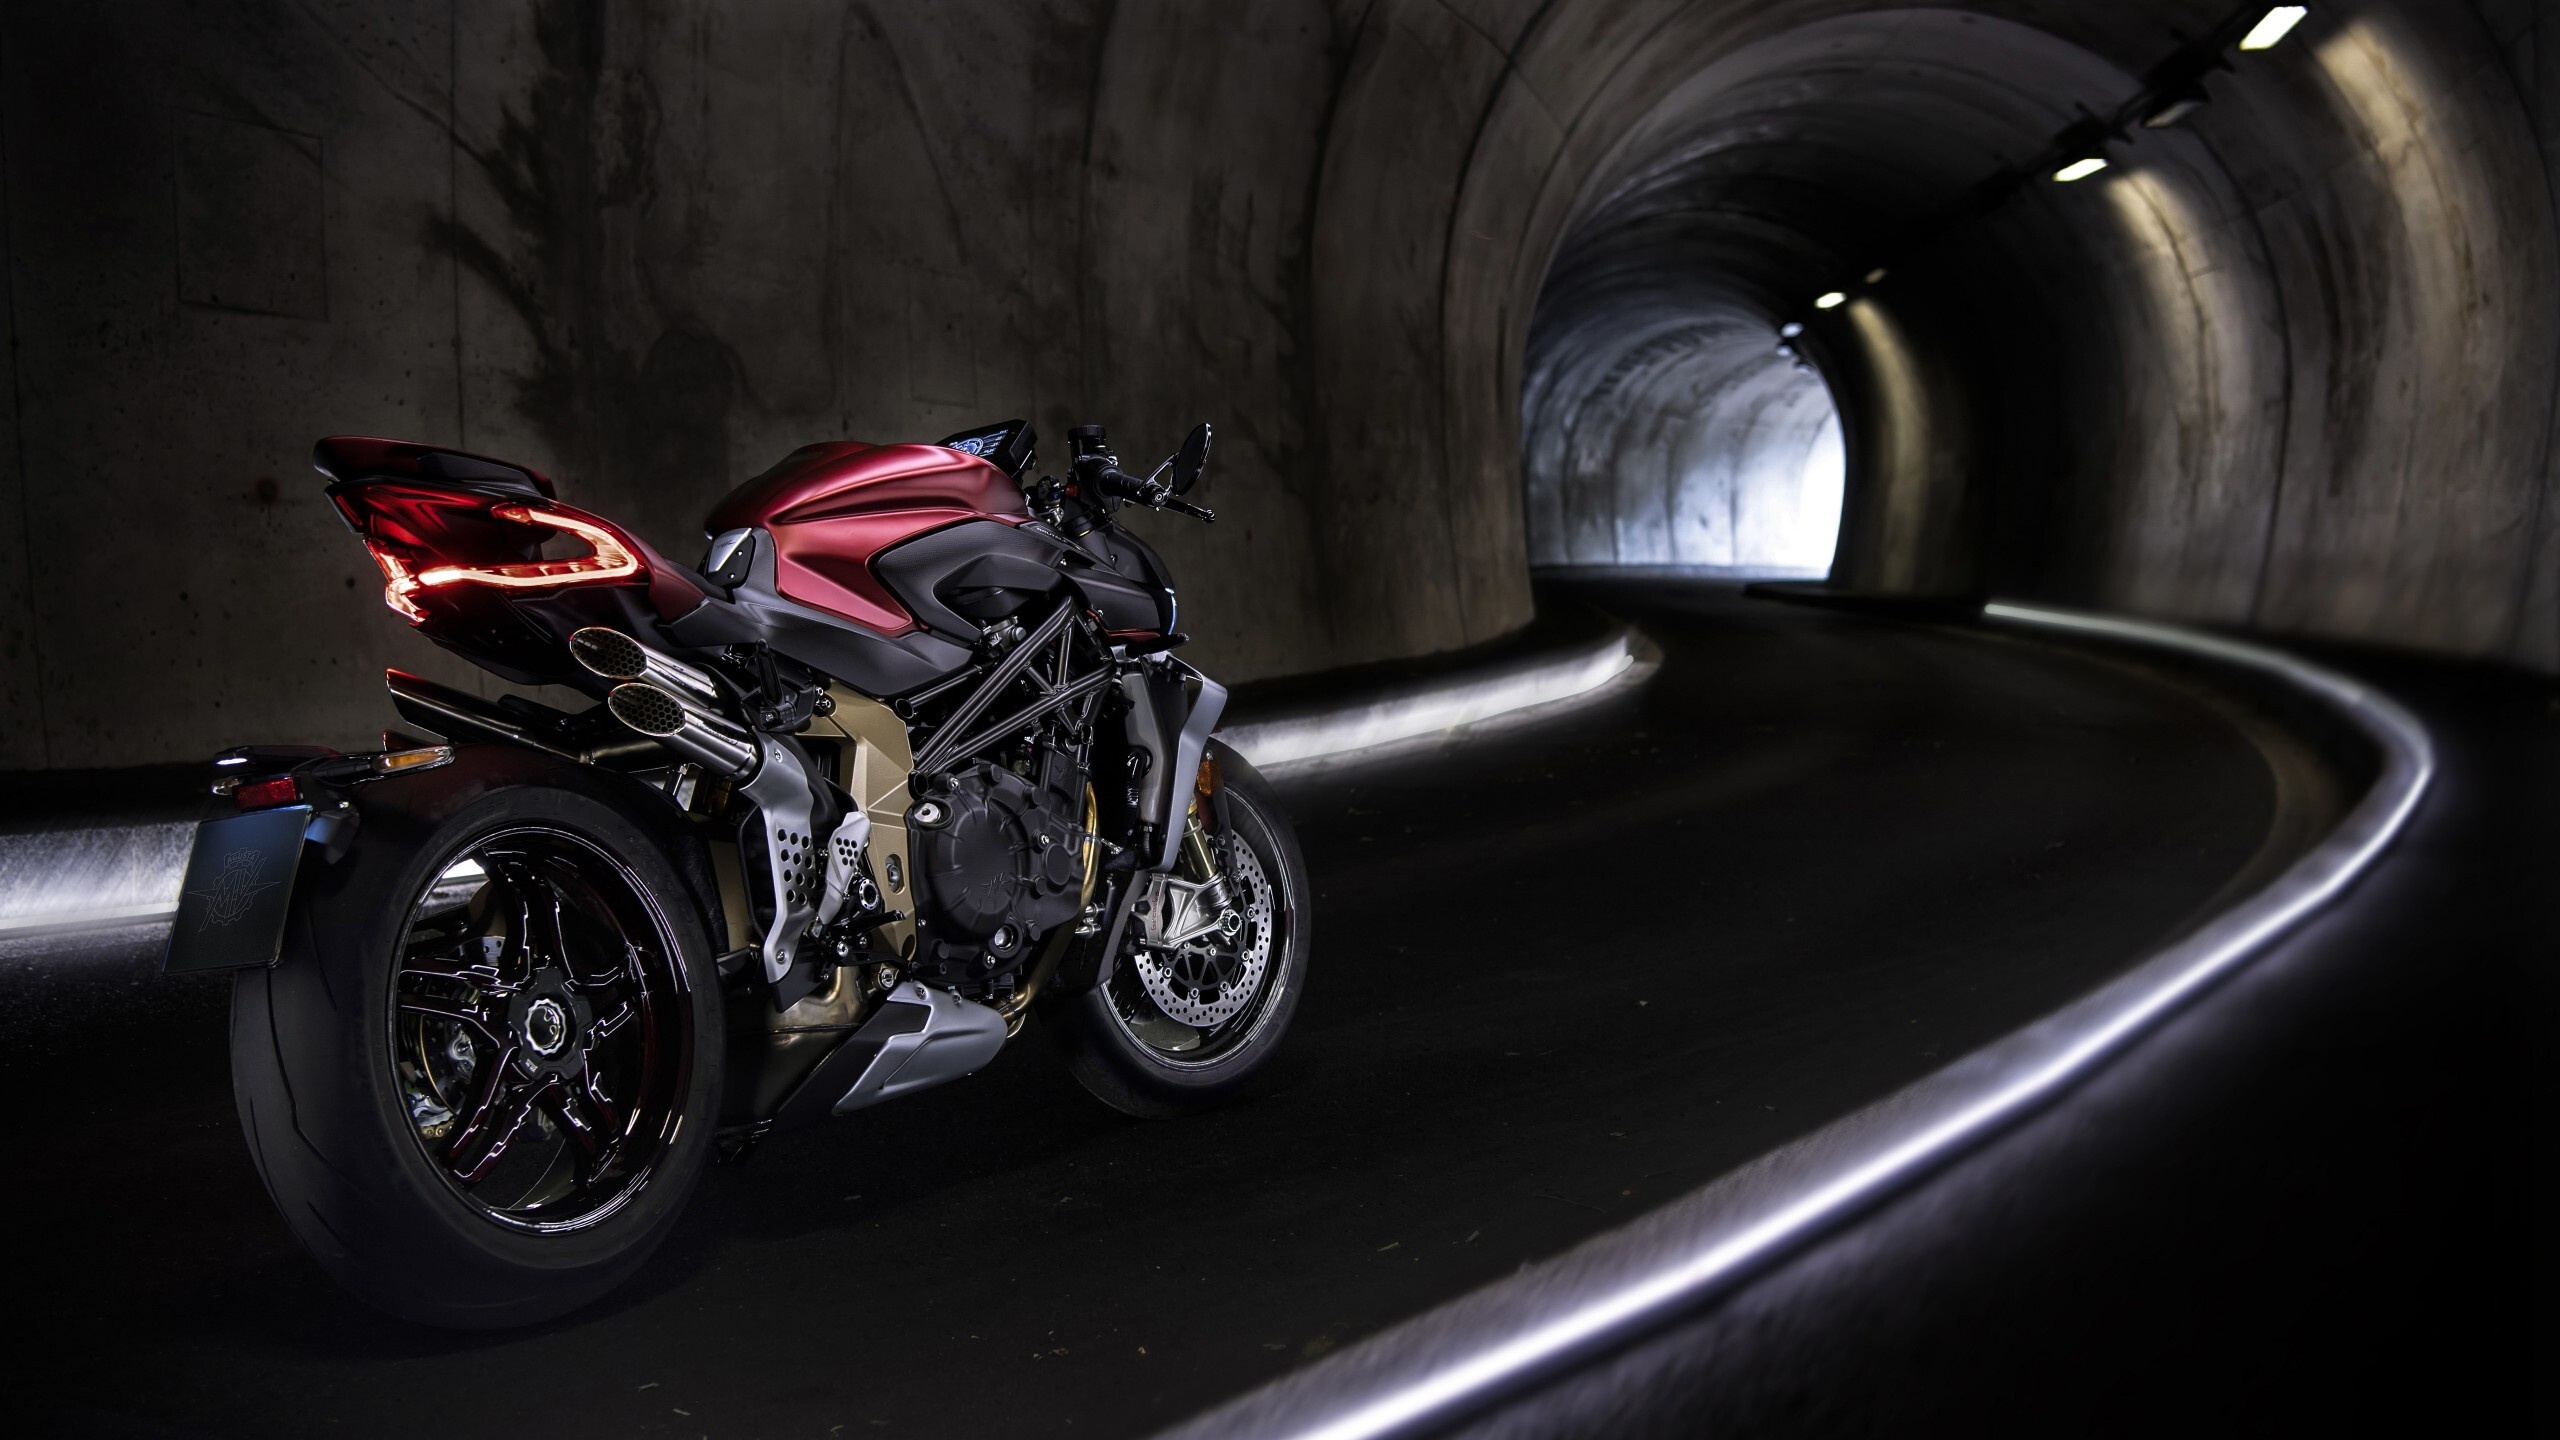 2020 MV Agusta Brutale 1000 RR wallpapers, Posted by John Anderson, HD showcase, Artistic masterpieces, 2560x1440 HD Desktop